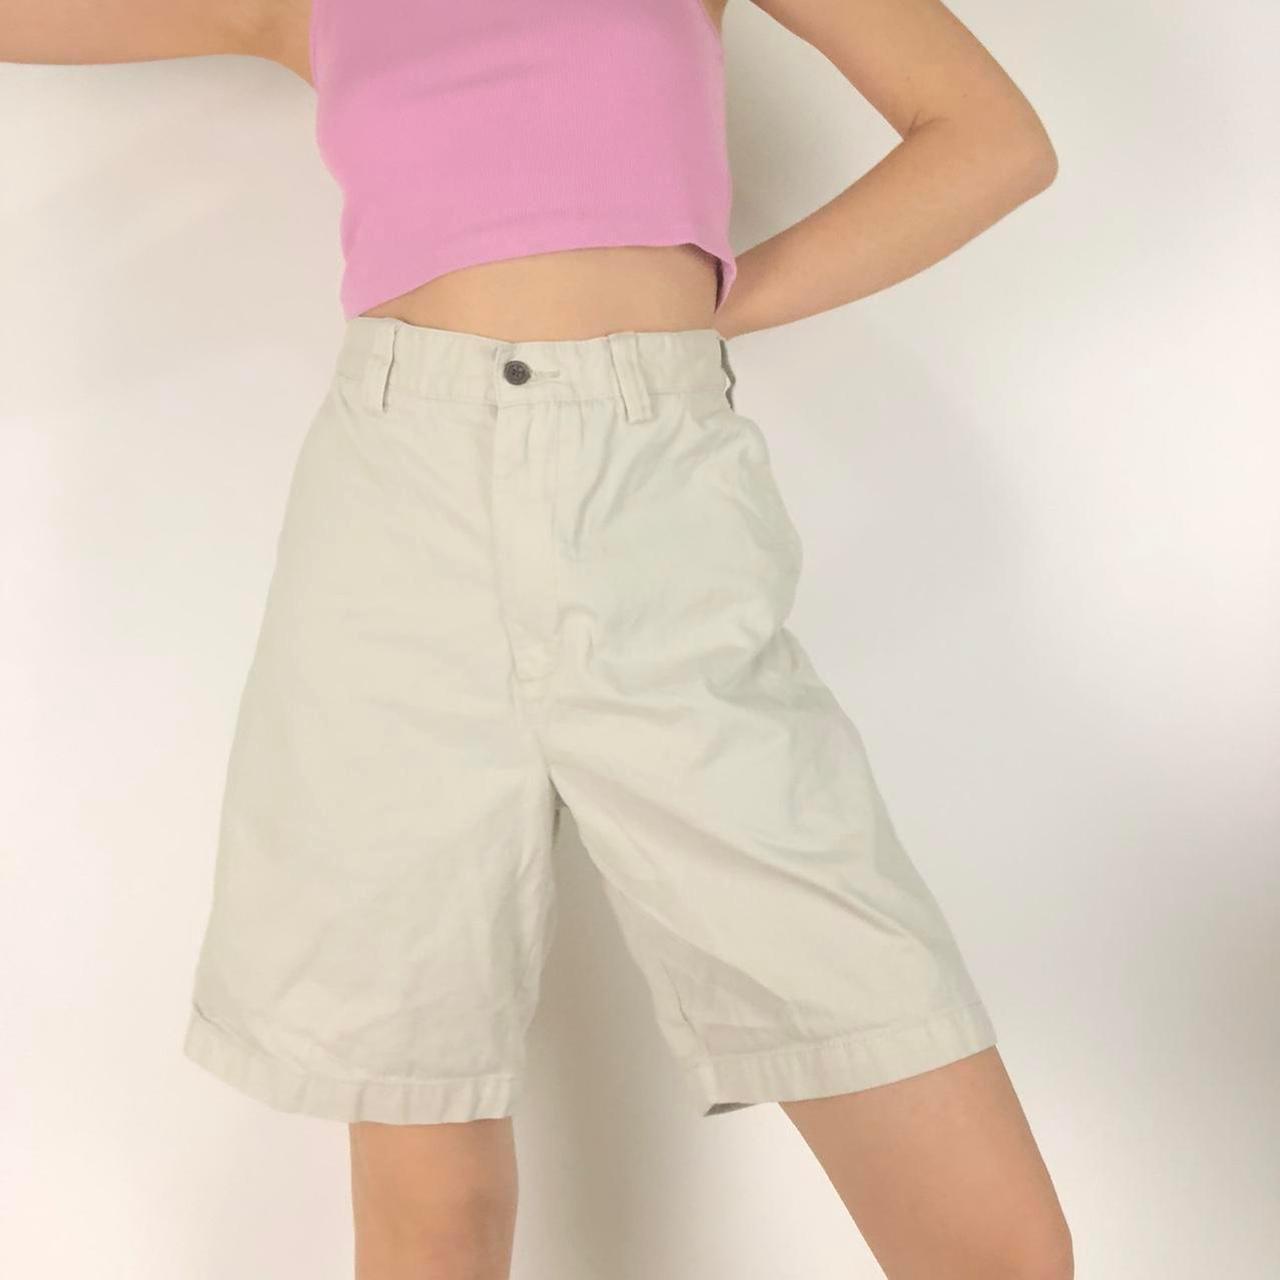 Product Image 1 - High waisted beige long shorts

These